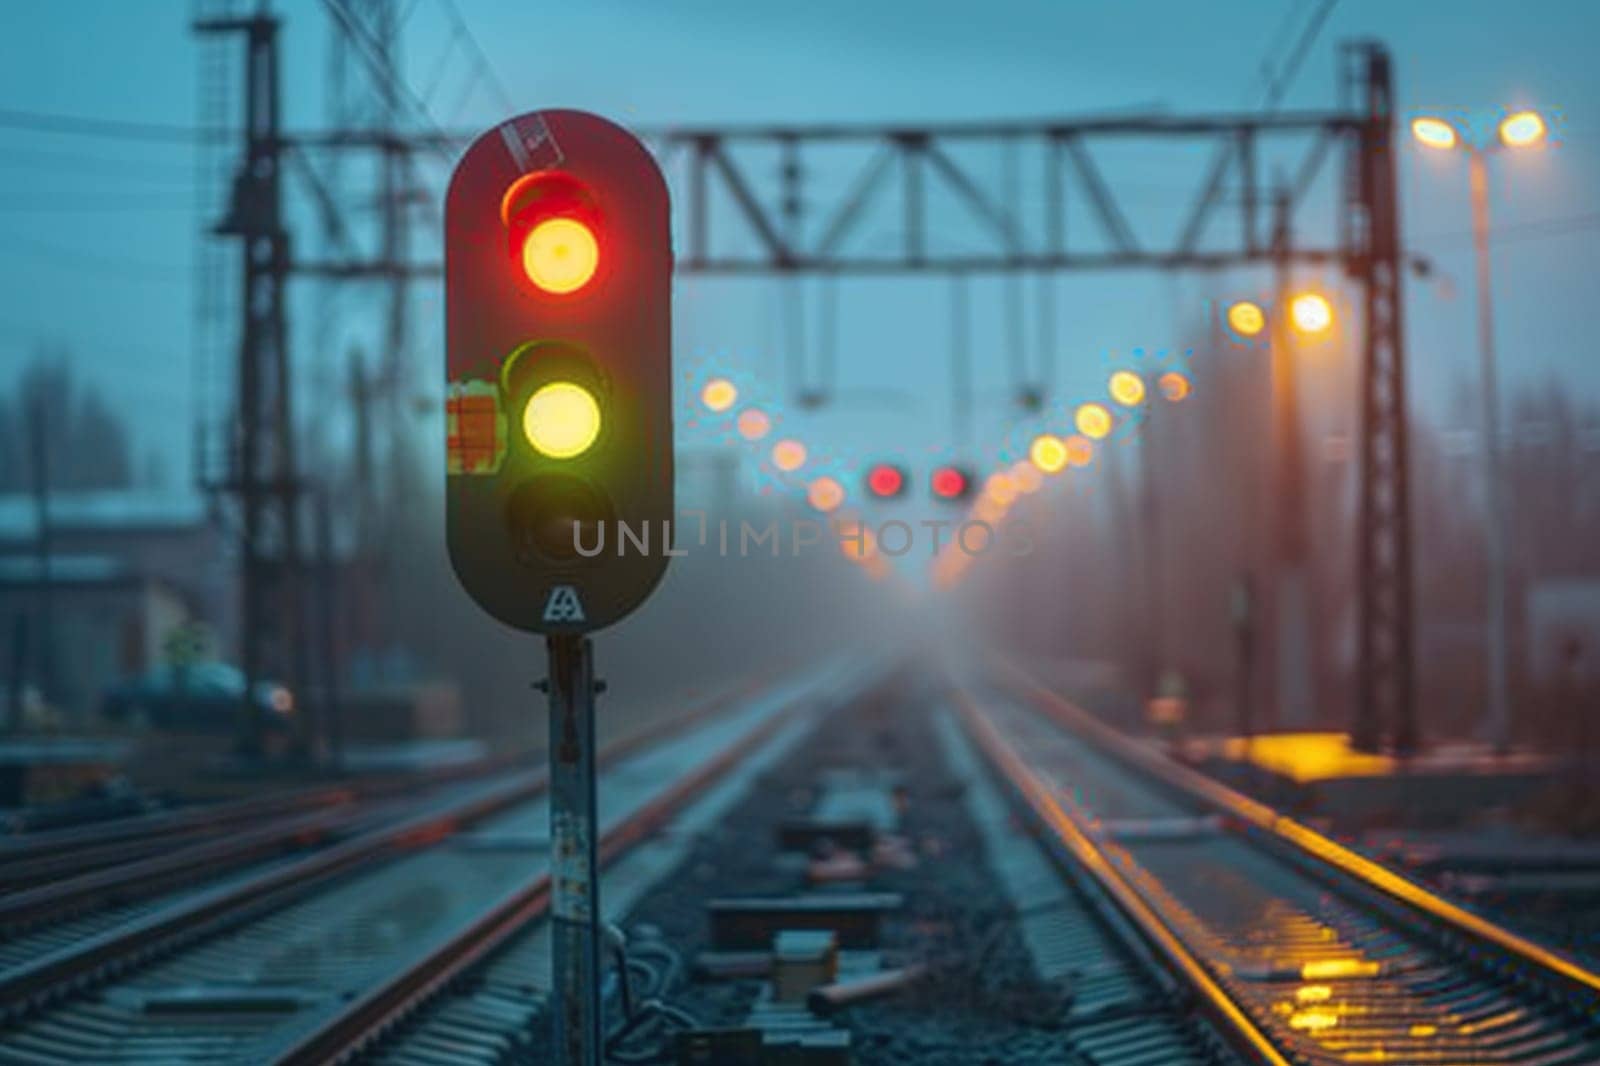 The traffic light between the railway tracks at dusk shows a red signal.